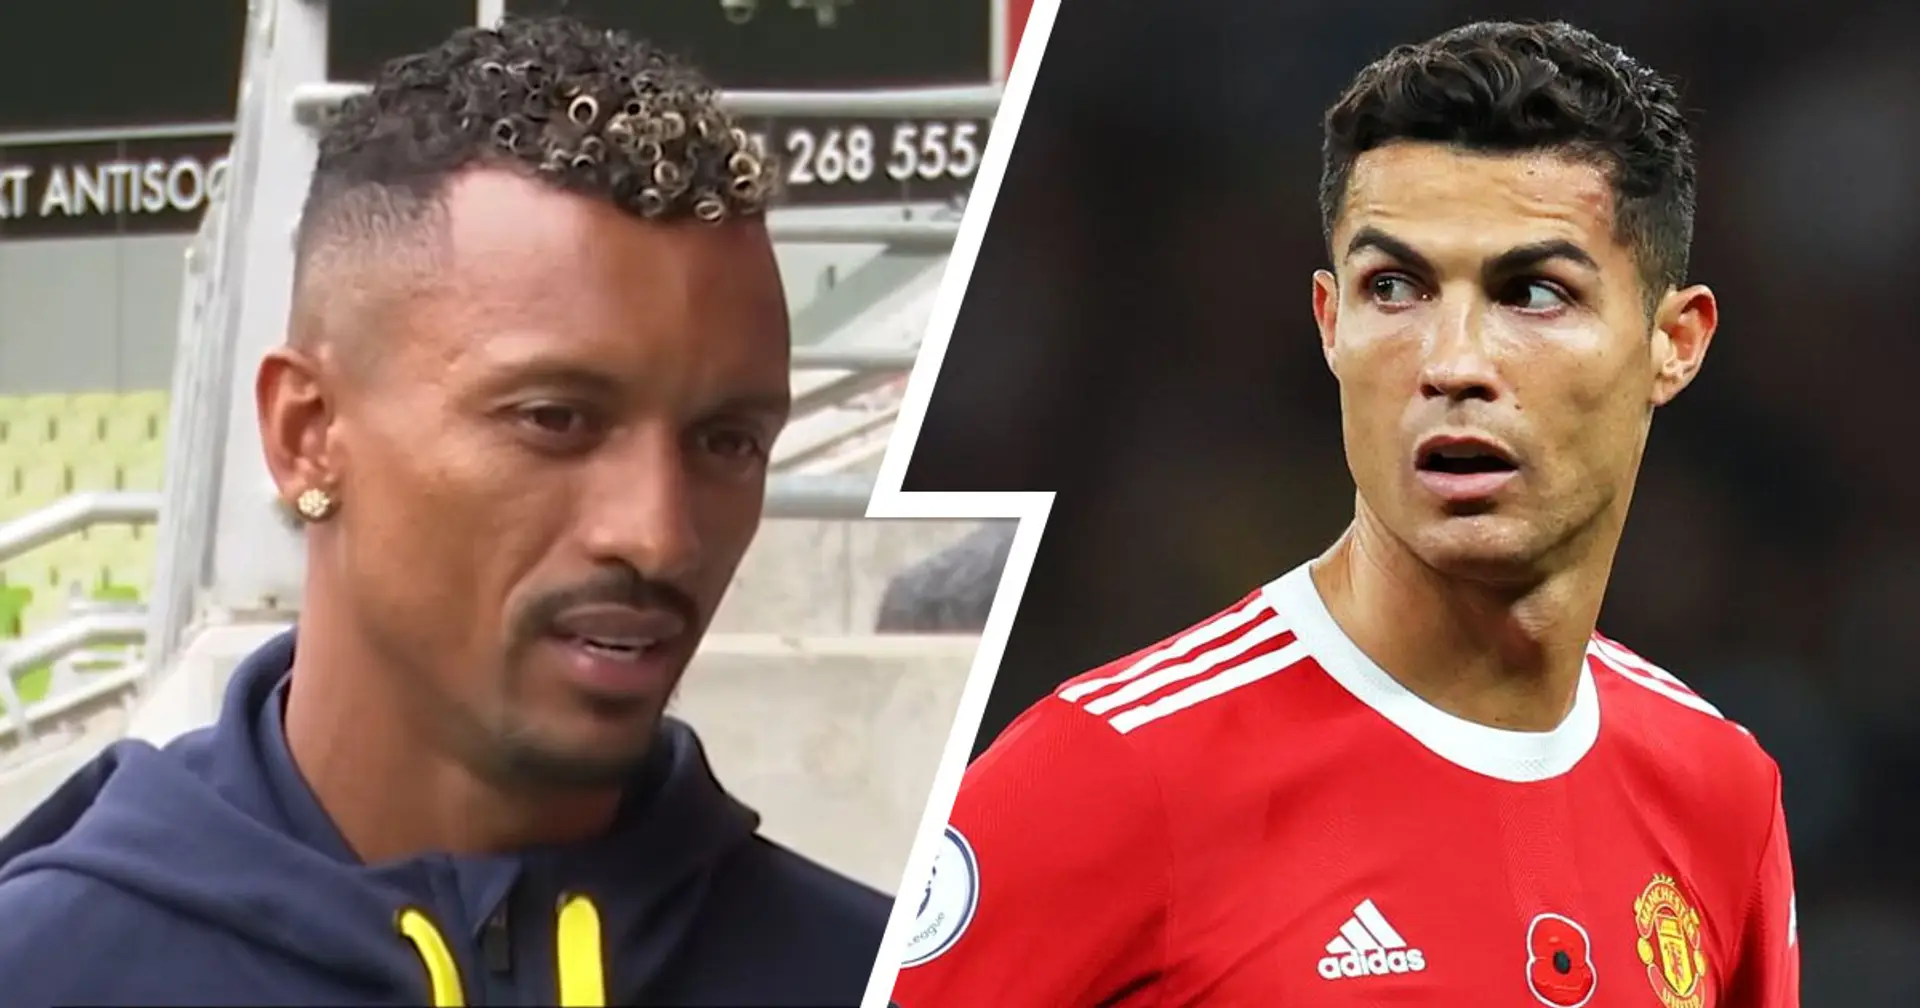 'When he's on vacation, he doesn't answer anybody': Nani reveals what Ronaldo texted him amid United exit links